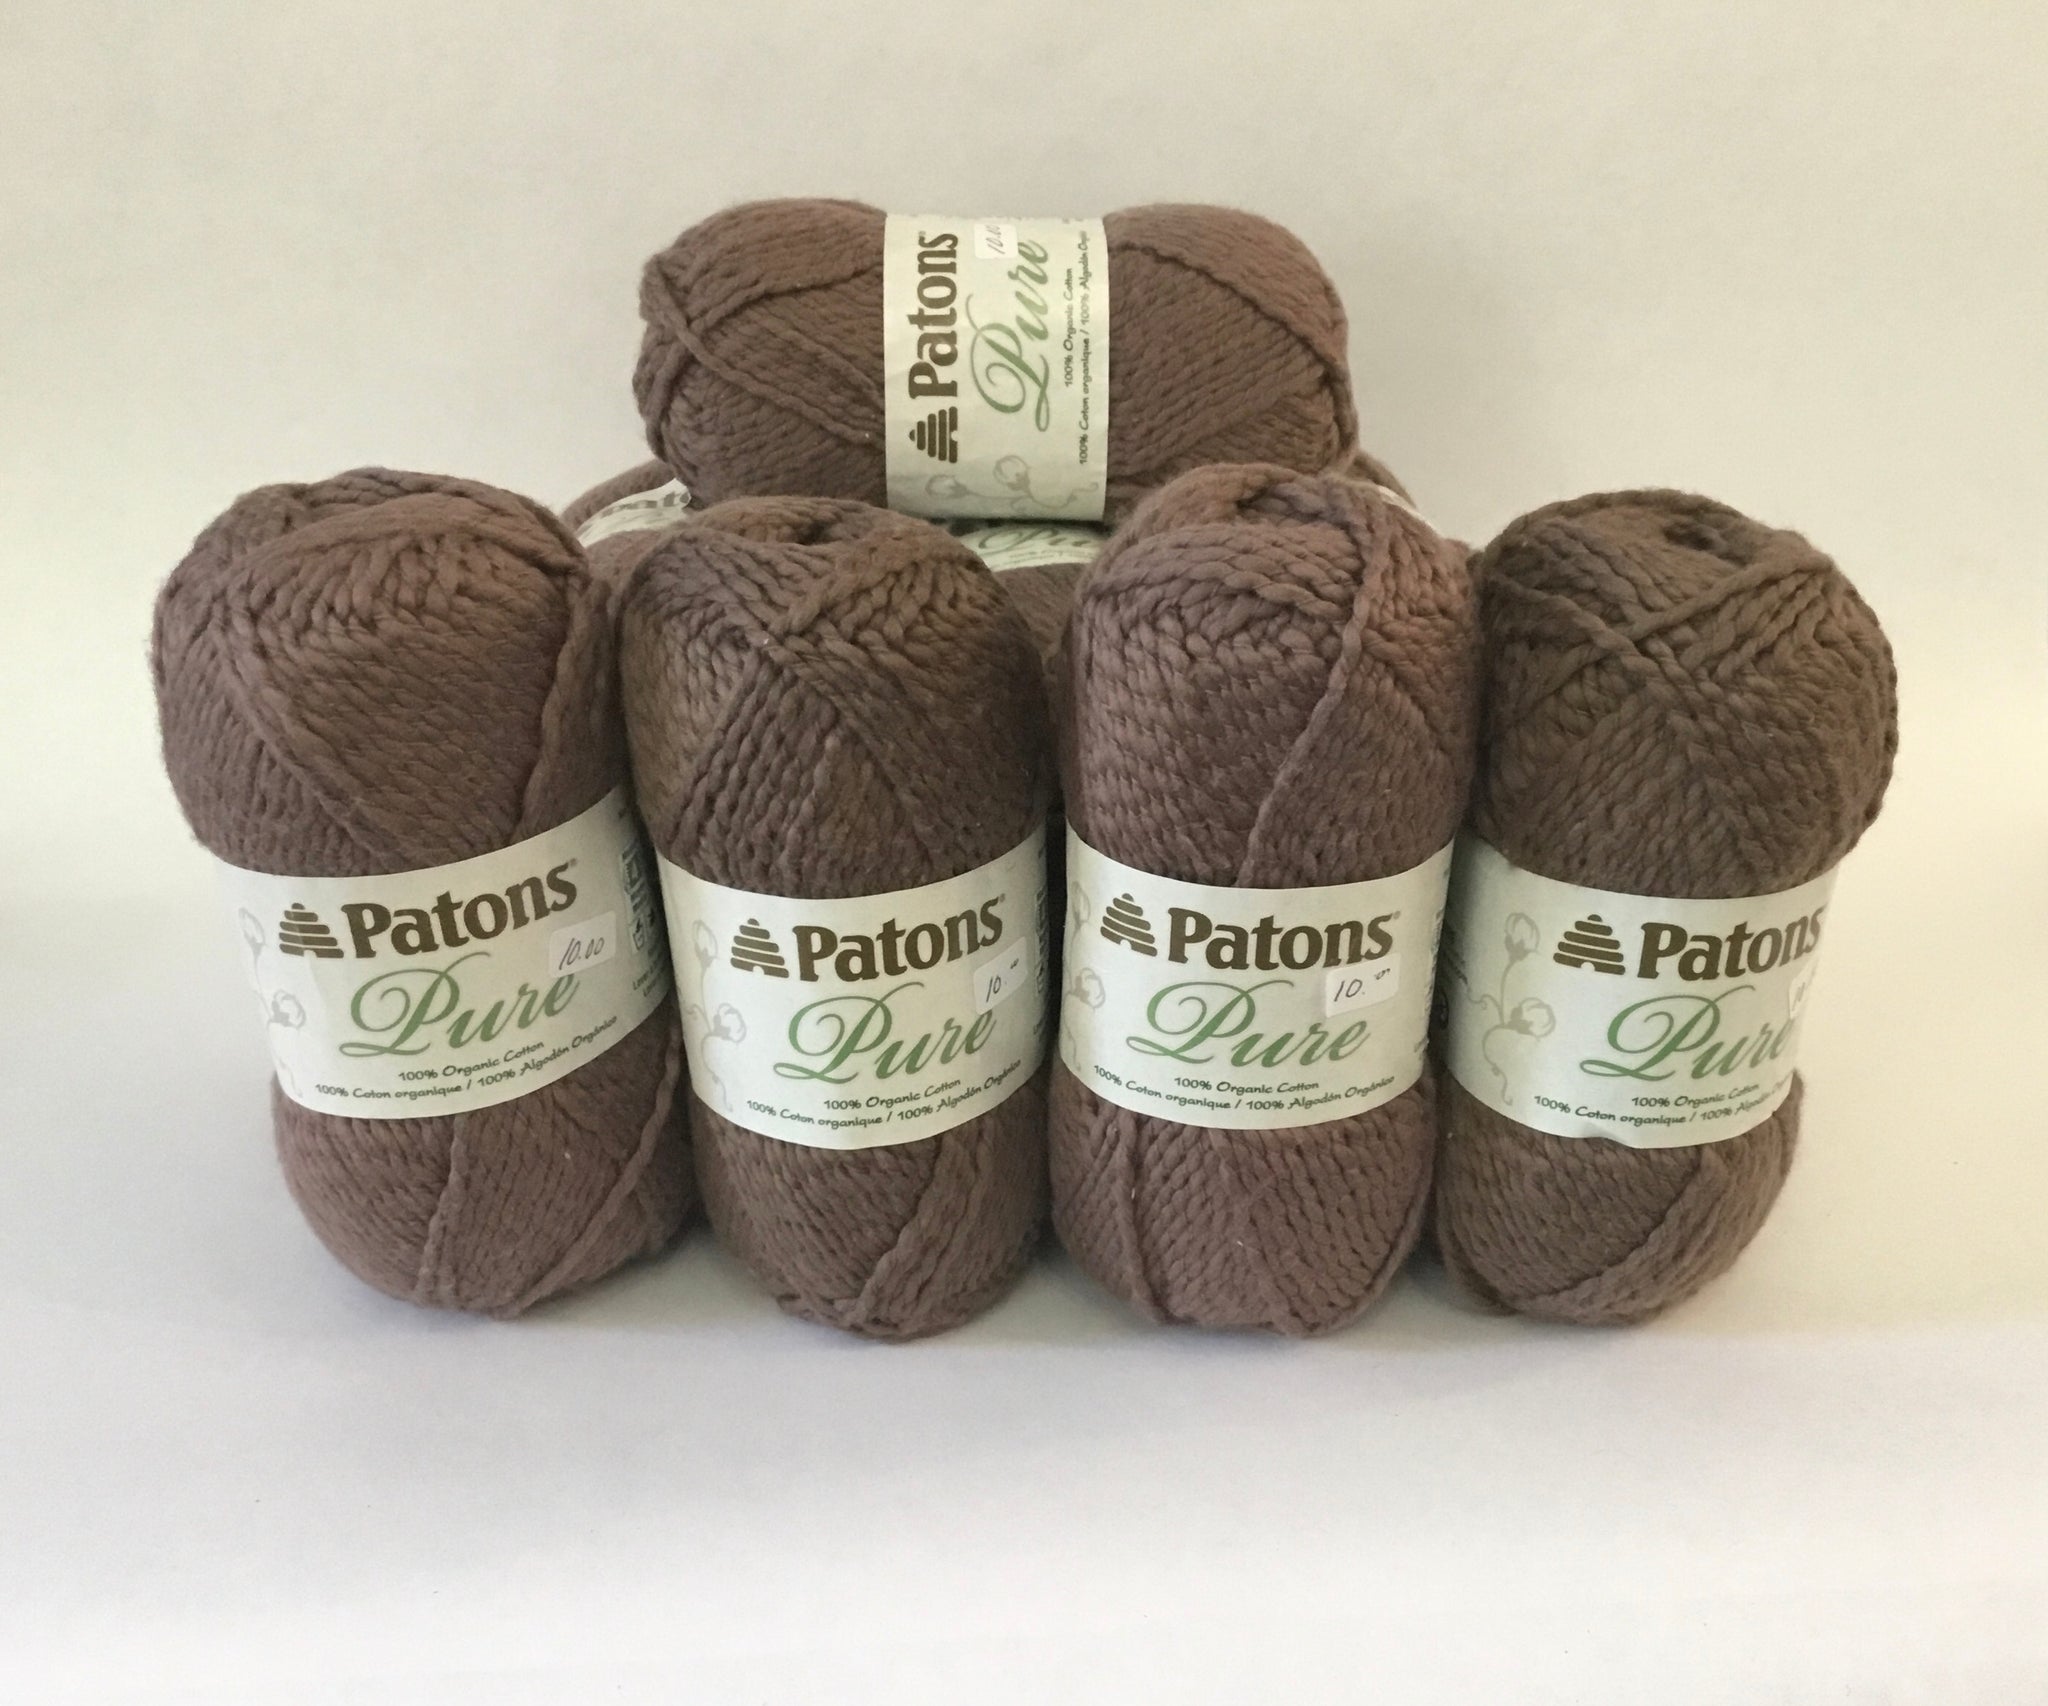 Patons coton organique taupe